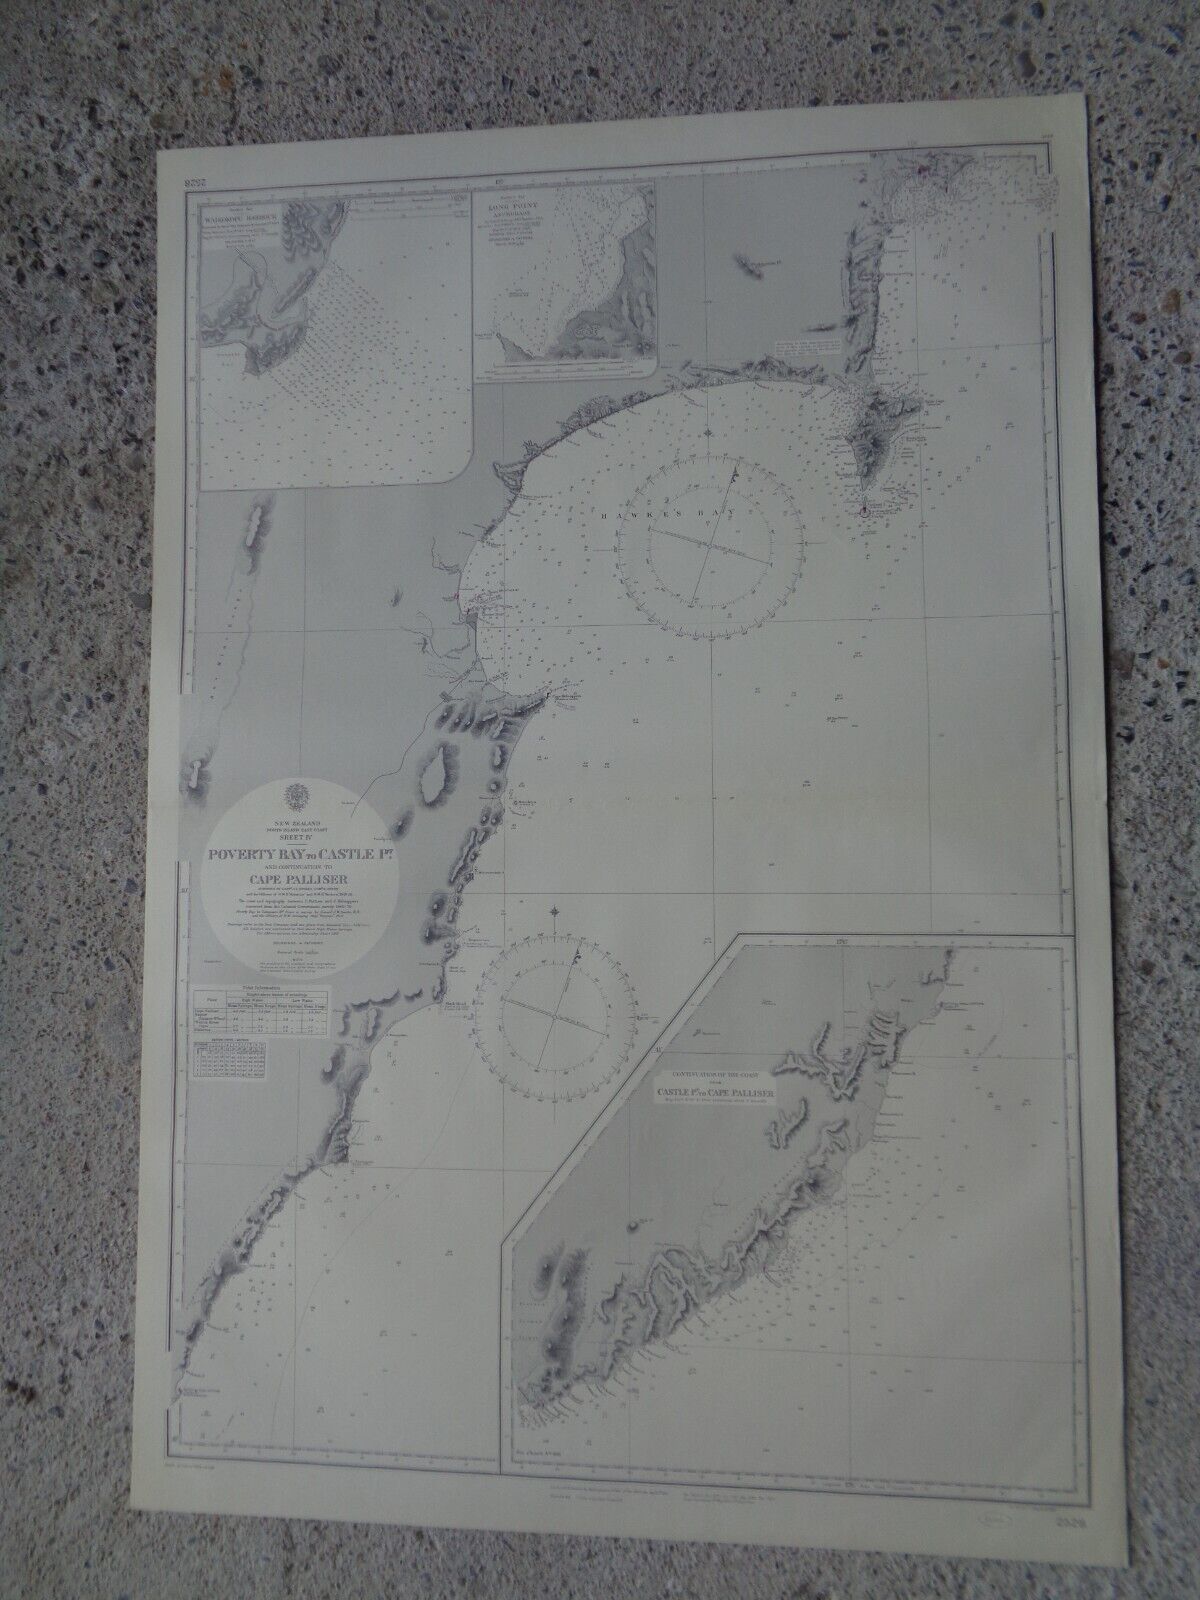 1954 New Zealand MARINE MAP / Poverty Bay to Castle Point